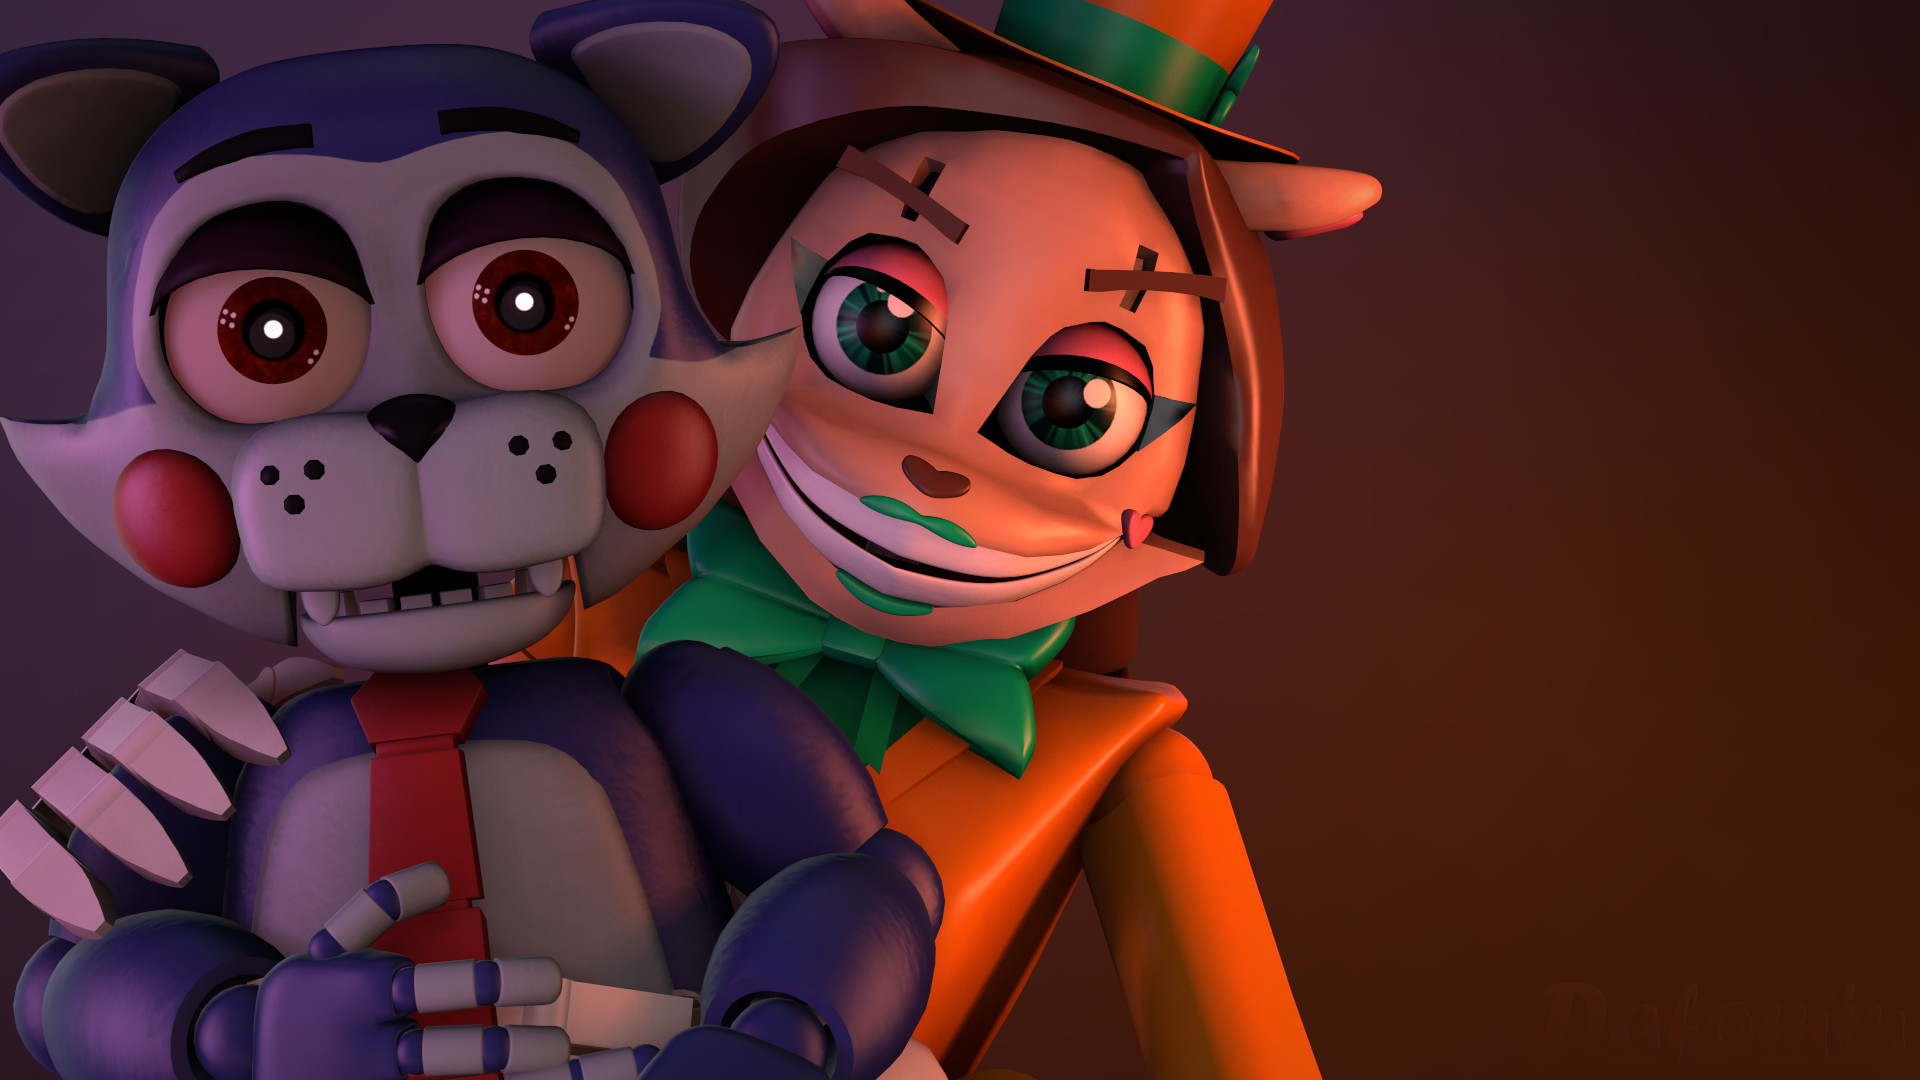 FNAF SFM Wallpaper Netty and adventure Candy by Dafomin